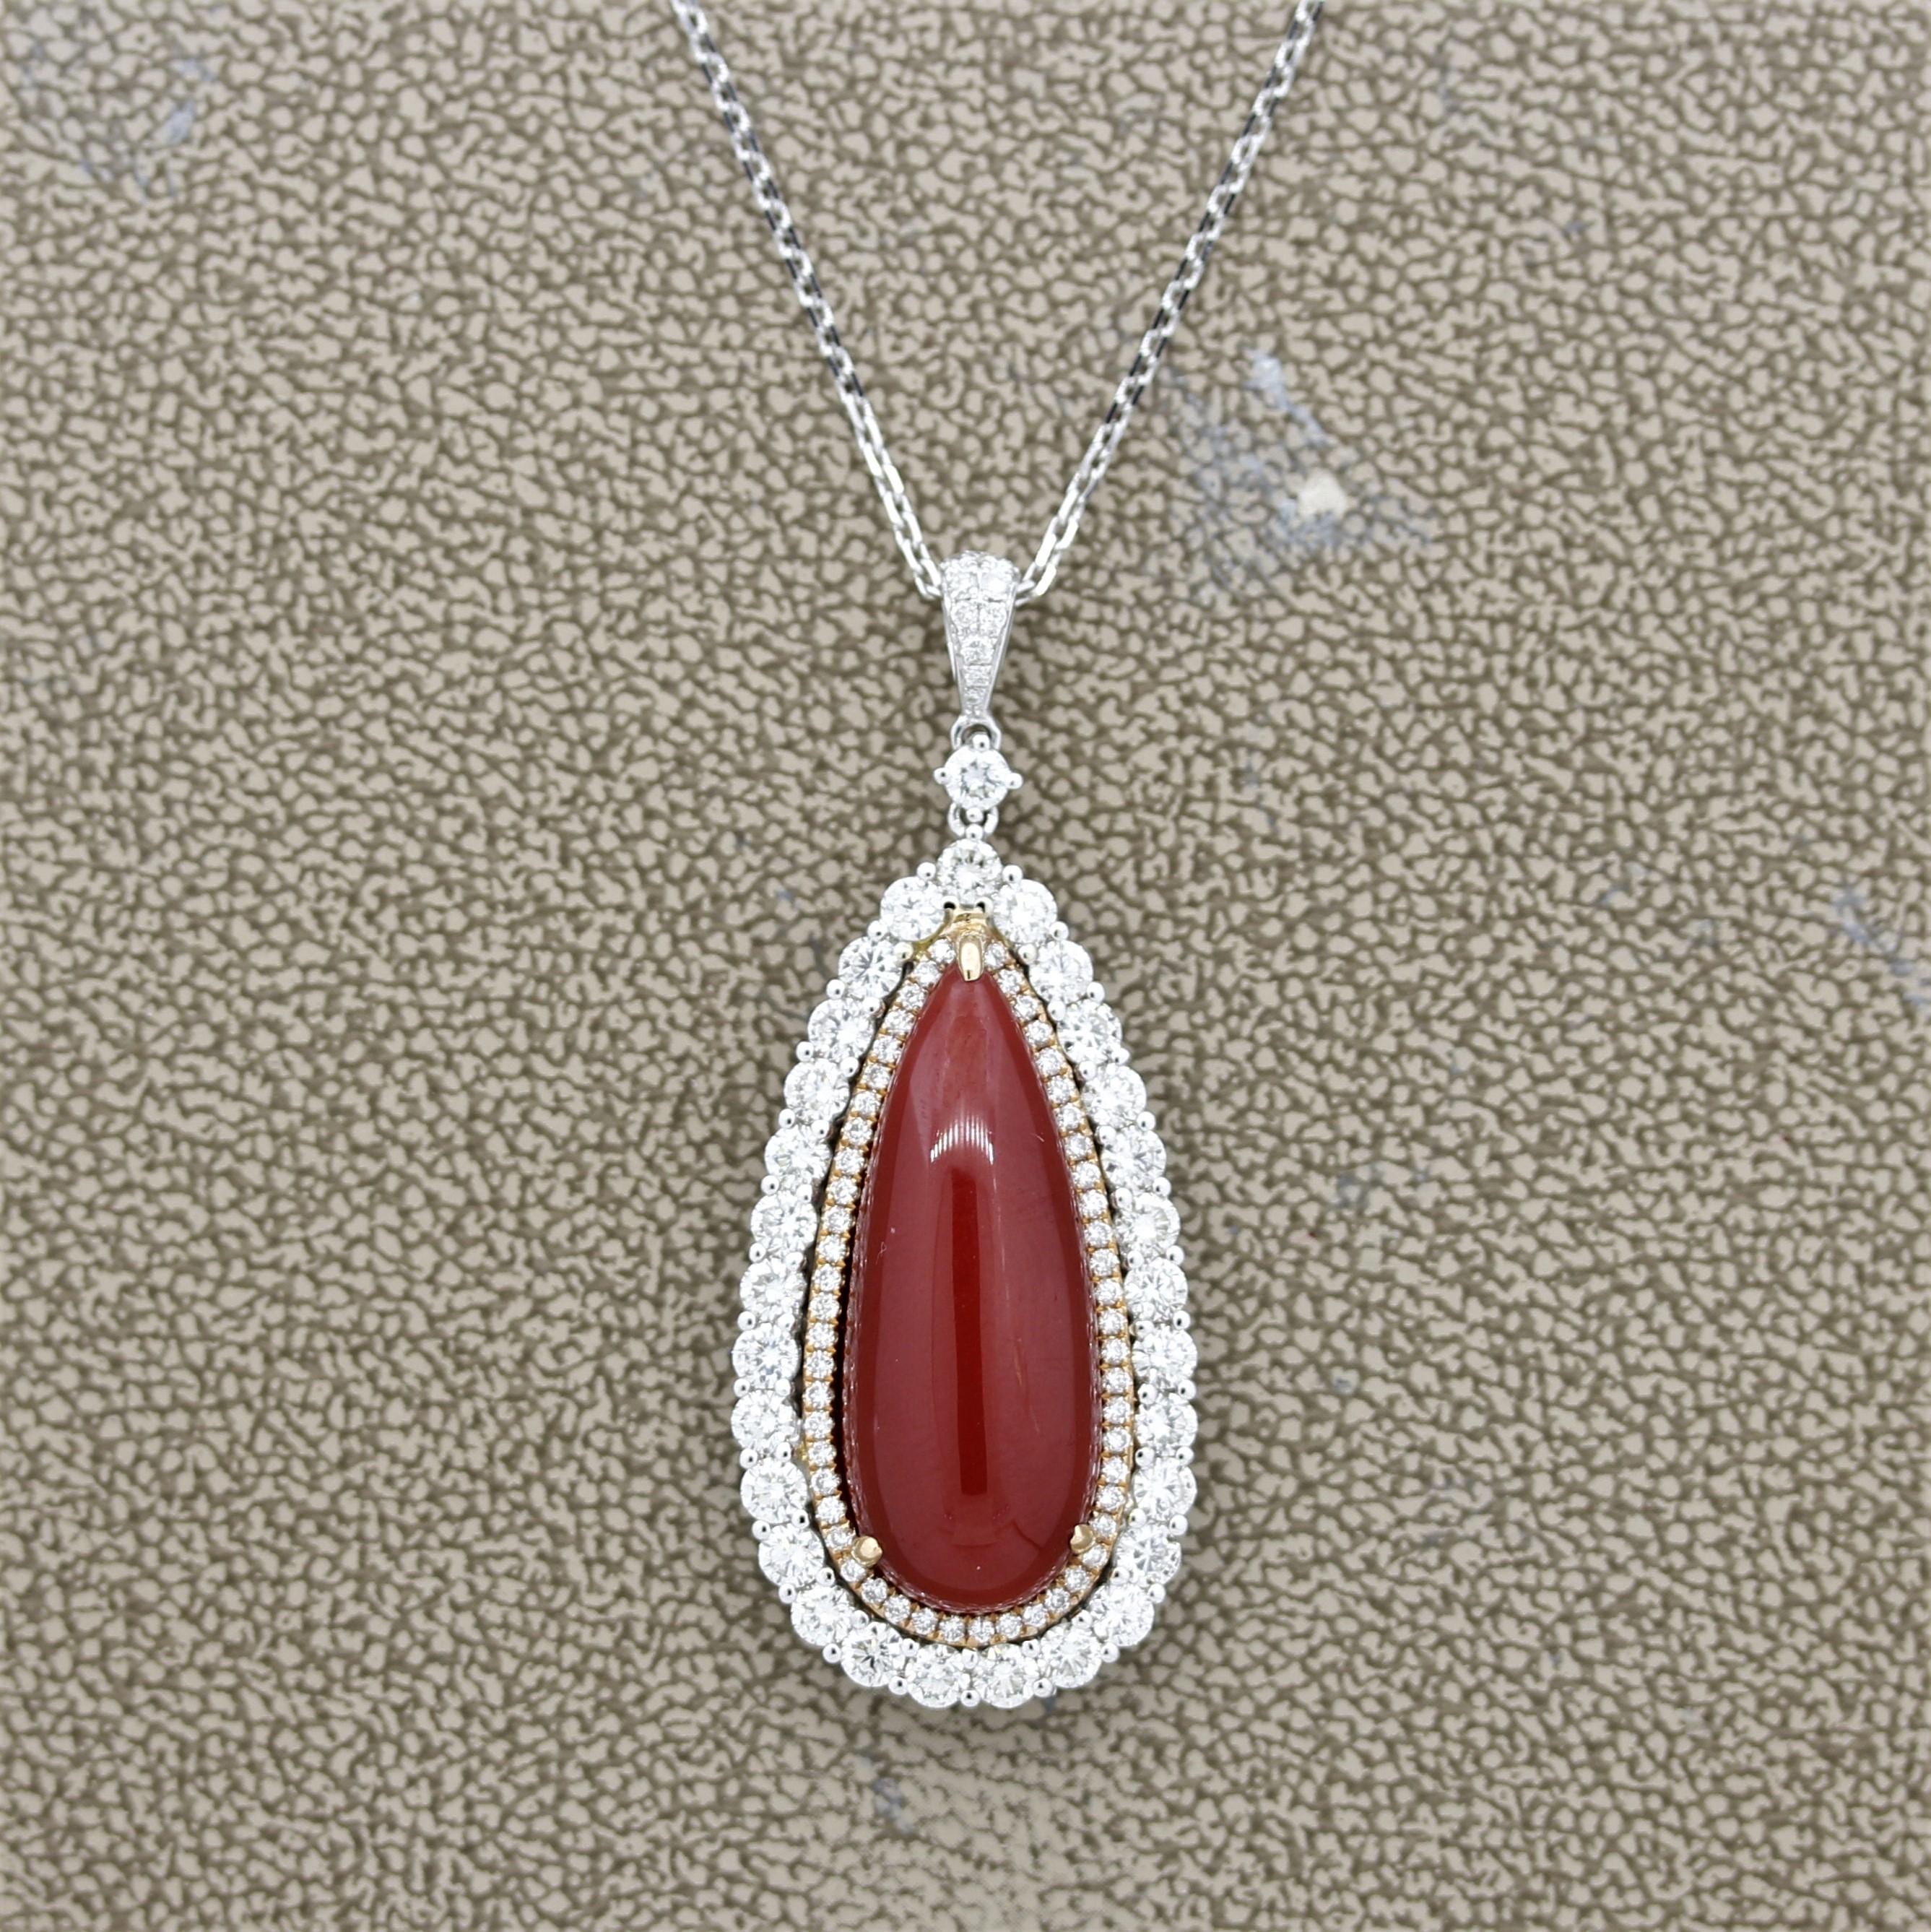 An extra fine piece of natural red coral polished as a smooth drop shape. It weighs 14.70 carats and most likely from the Mediterranean due to its amazing red color. Accented and haloing the coral are 2.29 carats of round brilliant cut diamonds. The